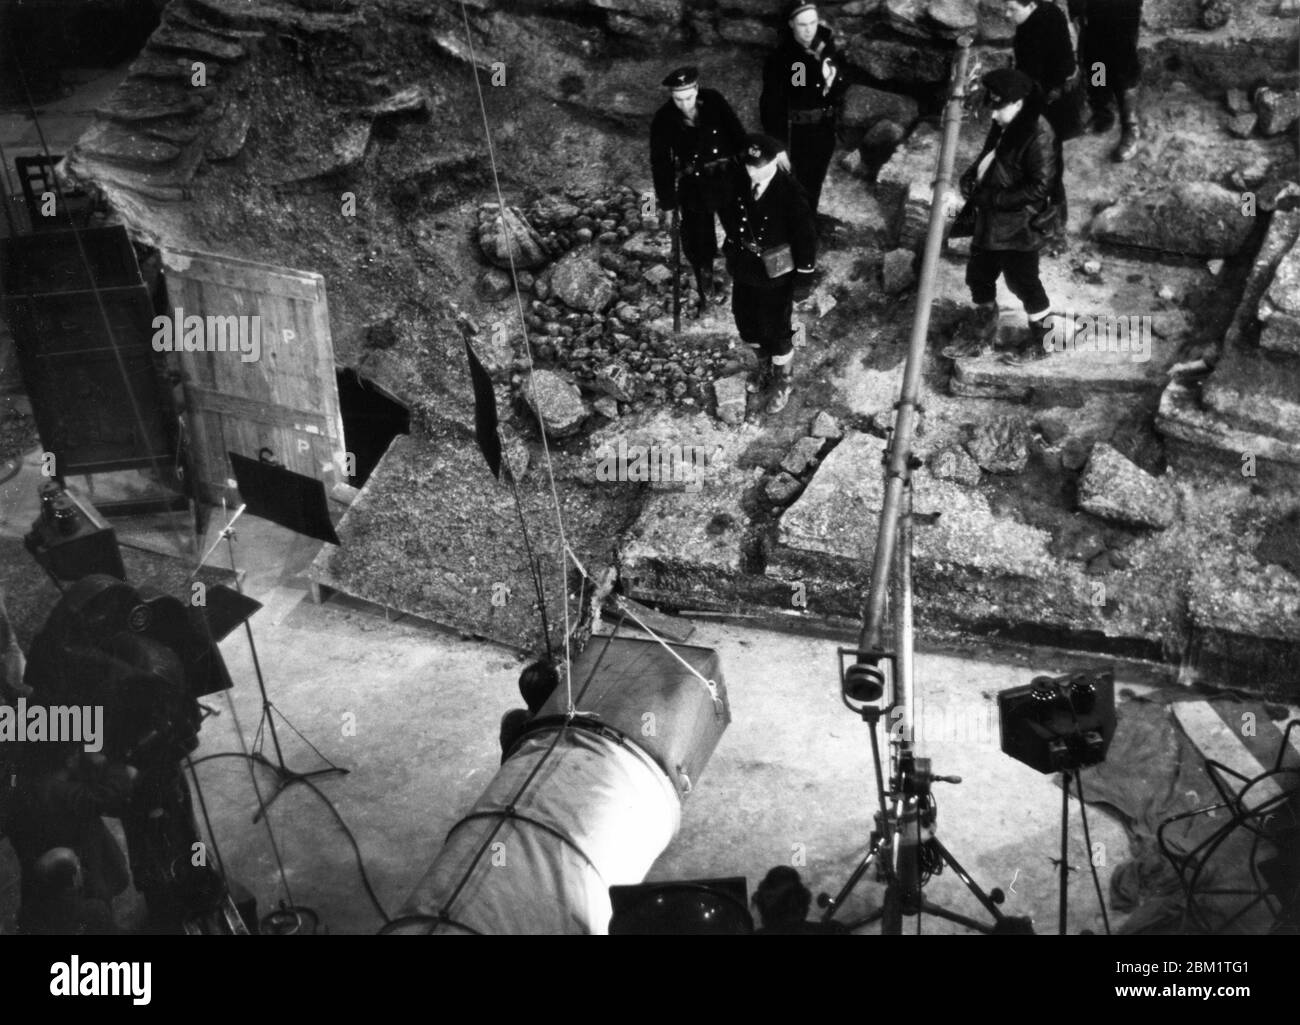 Director MICHAEL POWELL (bottom left corner) with Film Crew on set candid filming JOHN CHANDOS ERIC PORTMAN RICHARD GEORGE PETER MOORE and NIALL MacGINNIS in 49TH PARALLEL 1941 original story and screenplay EMERIC PRESSBURGER Ortus Films / General Film Distributors (GFD) Stock Photo